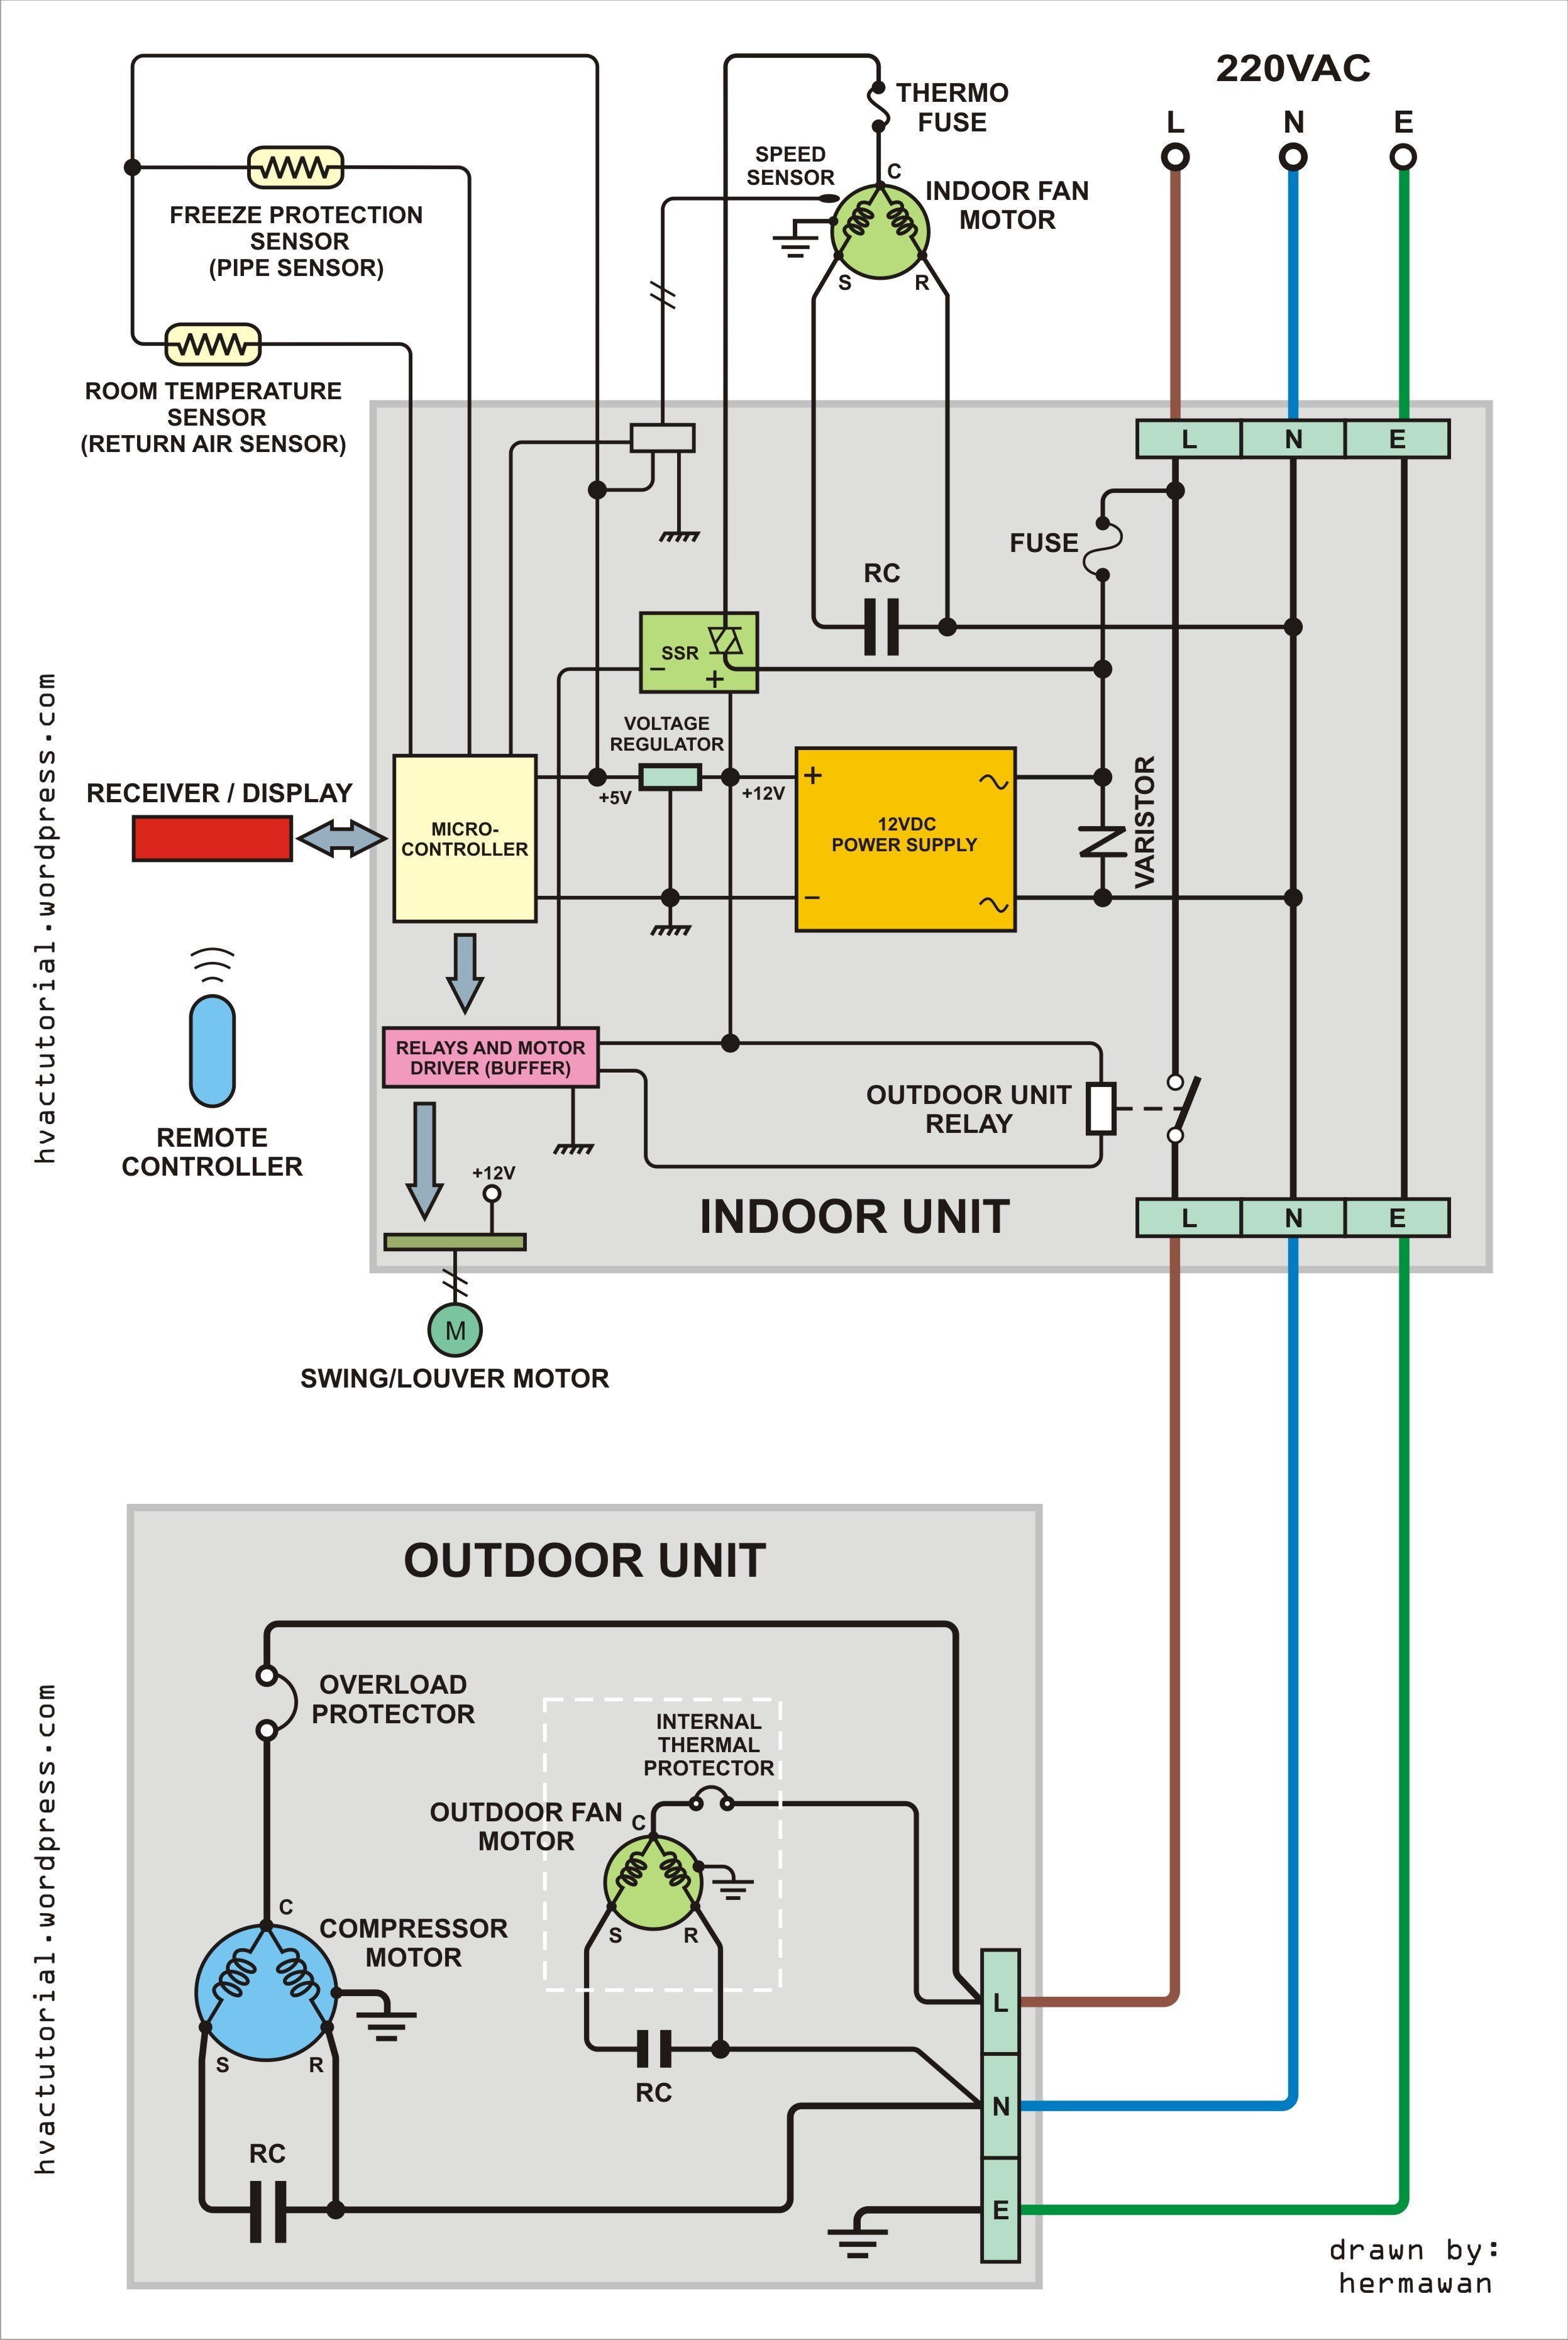 Wiring Diagram for Home Air Conditioner New Central Air Conditioning Wiring Diagram Download